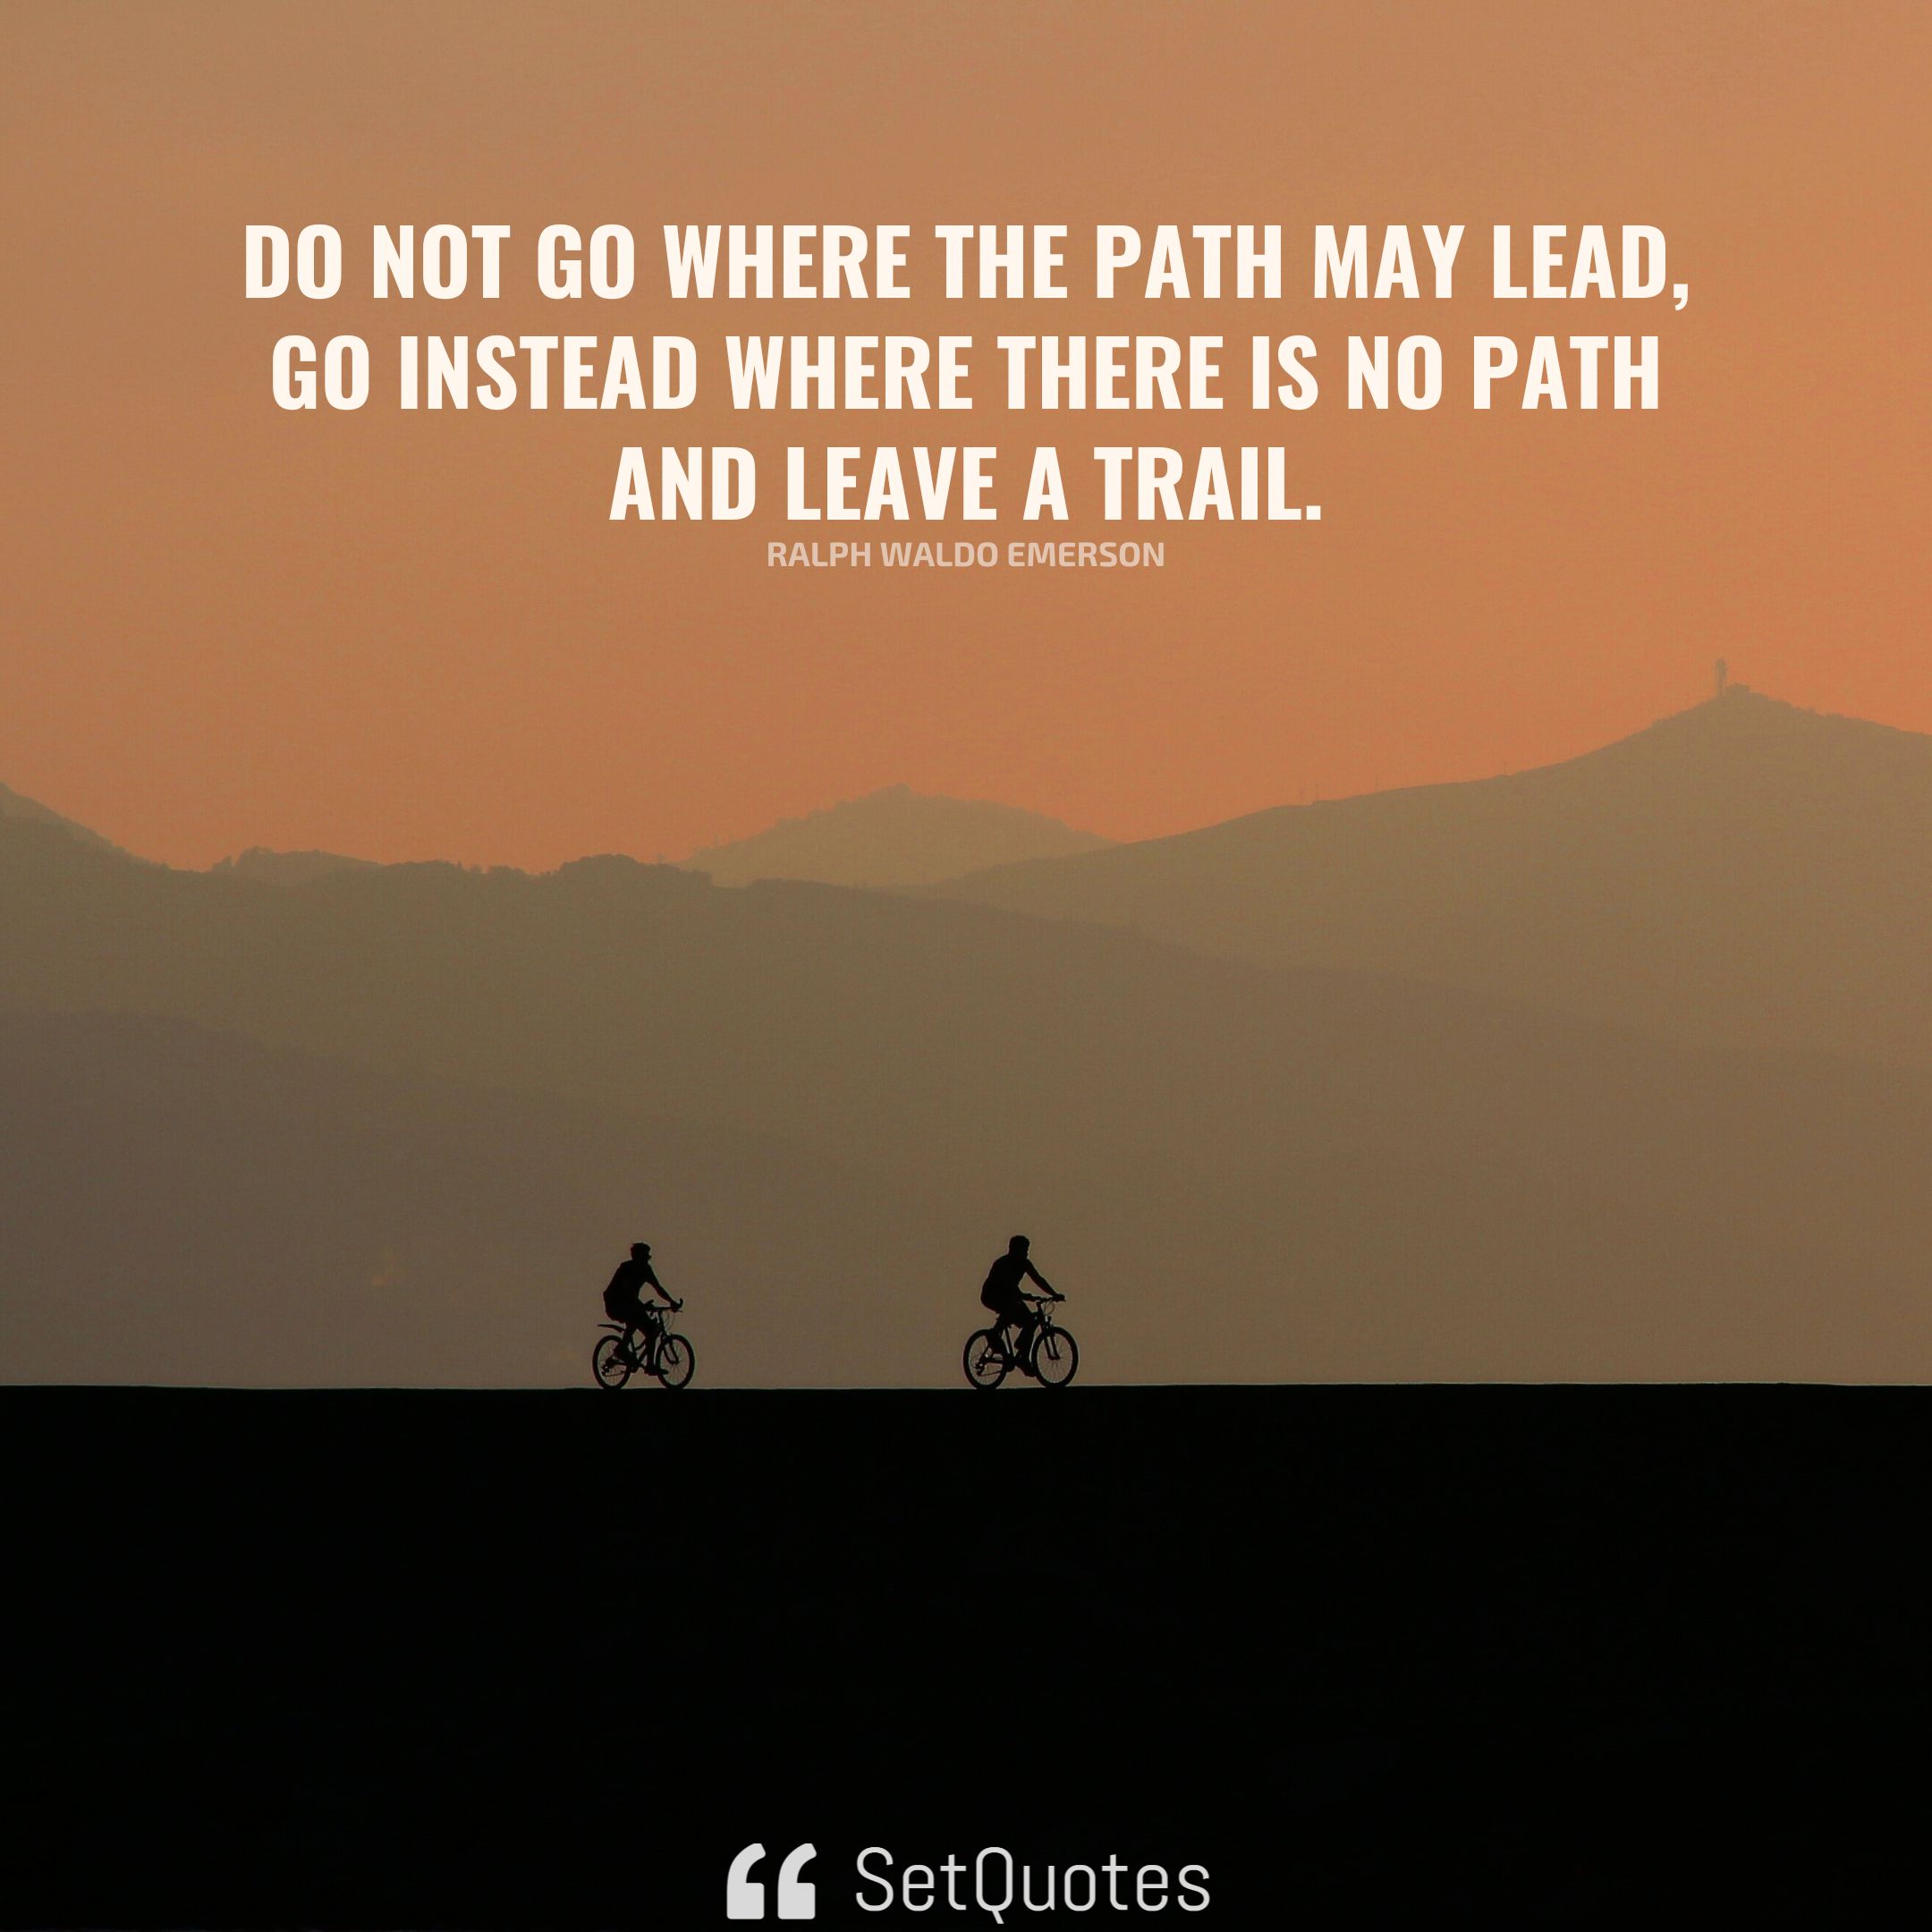 Do not go where the path may lead, go instead where there is no path and leave a trail. – Ralph Waldo Emerson